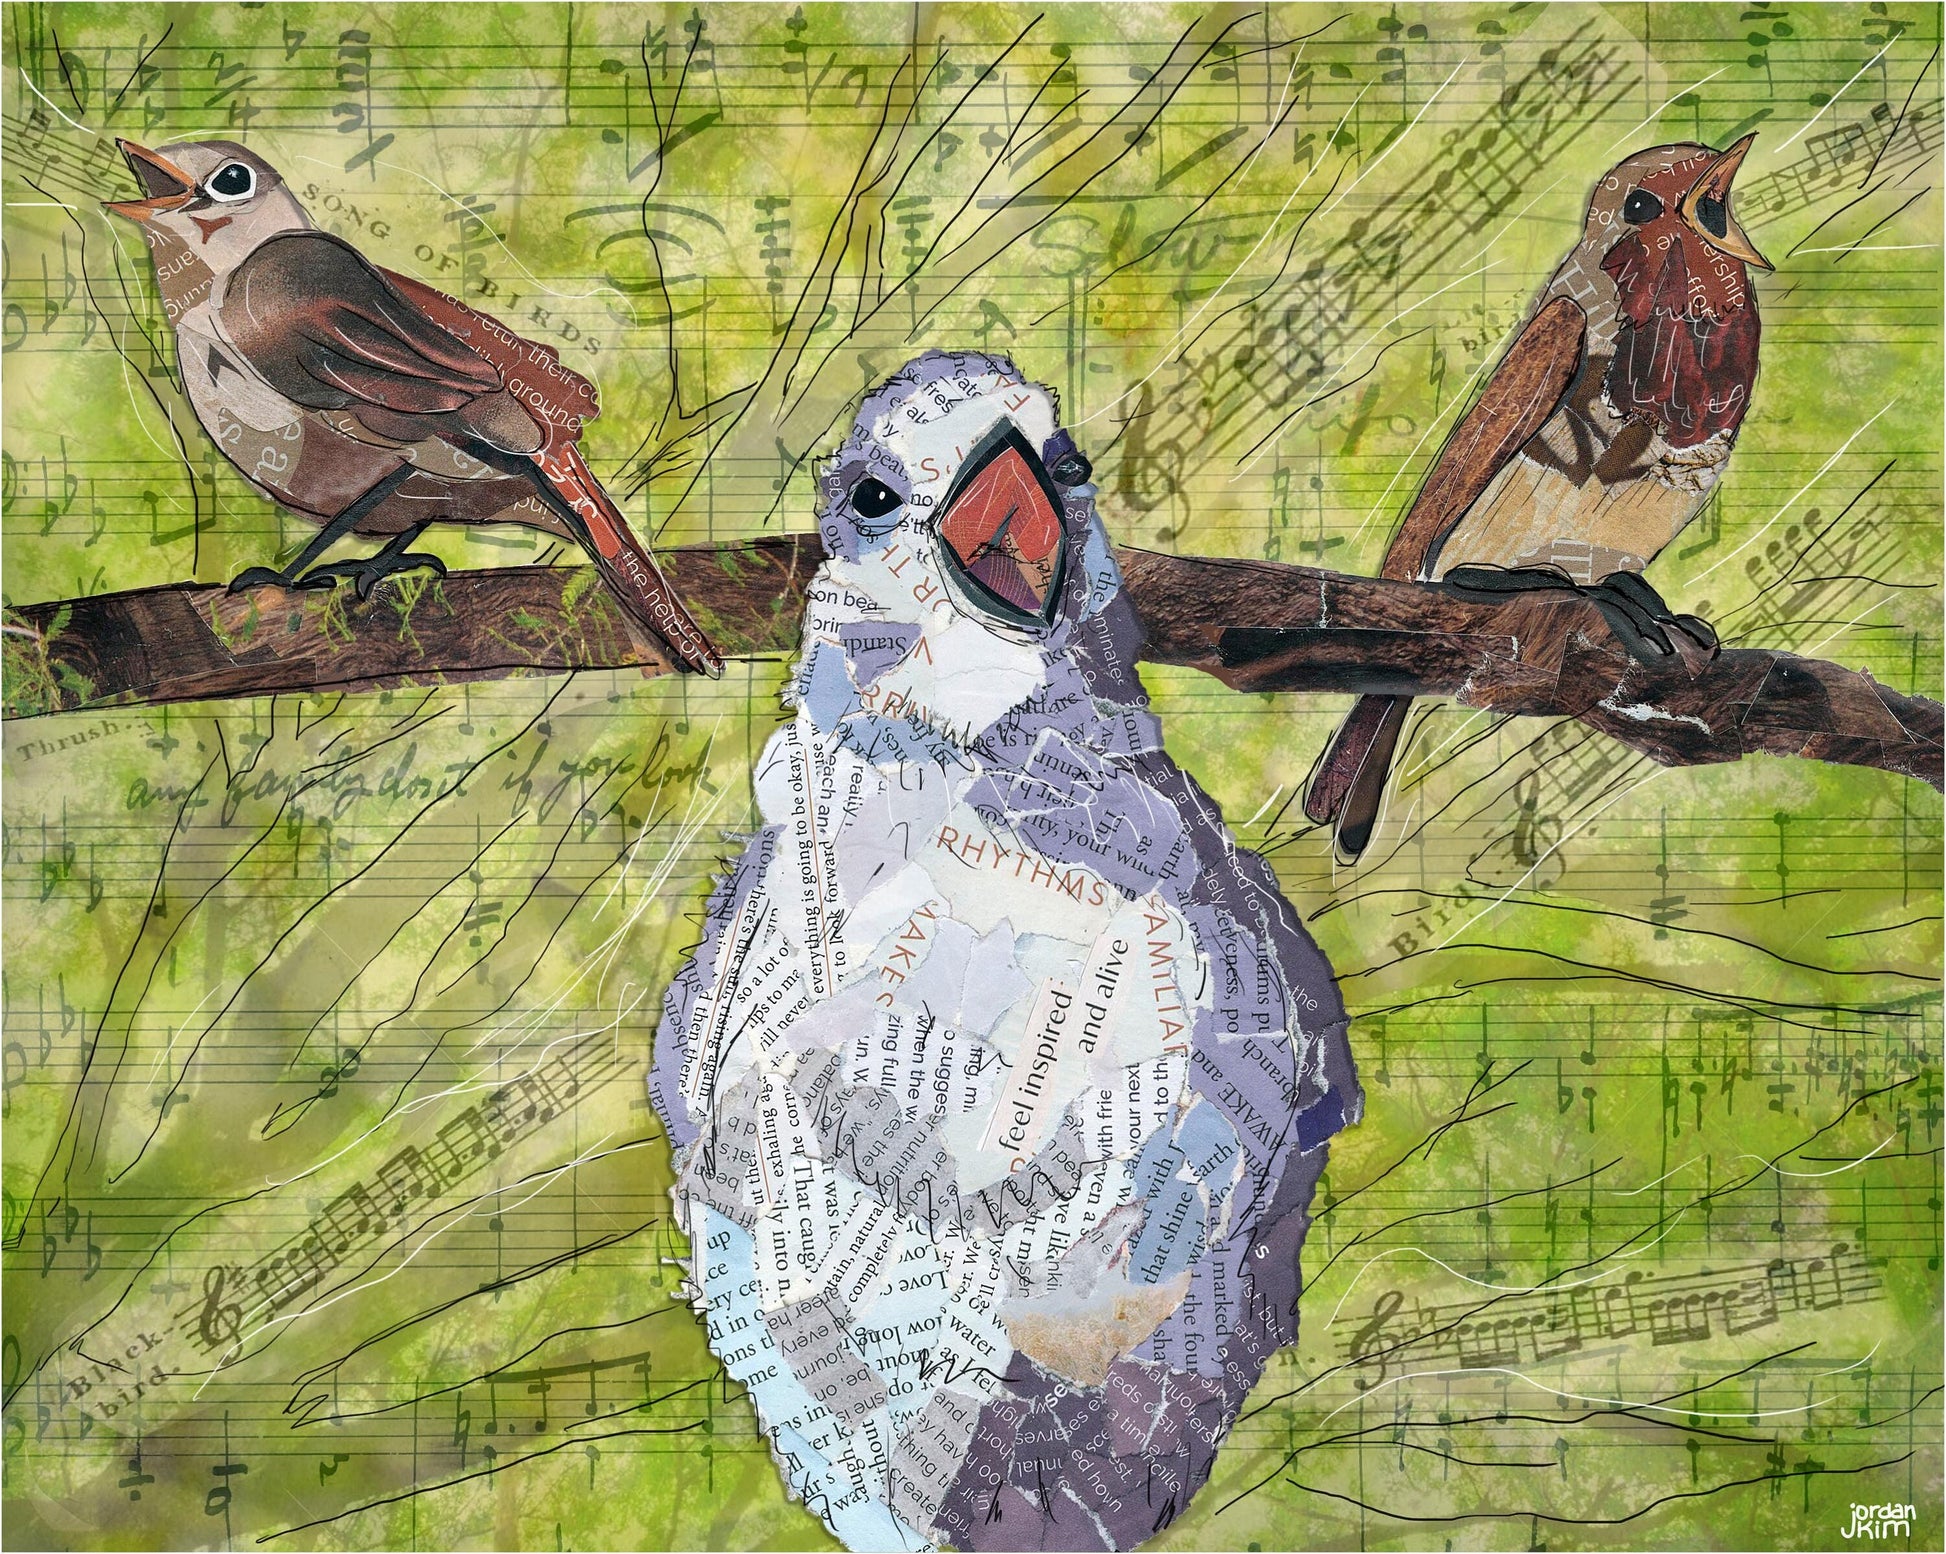 8x10 Art Print of a mixed media collage of birds singing in the tree branches made of sheet music - green, music